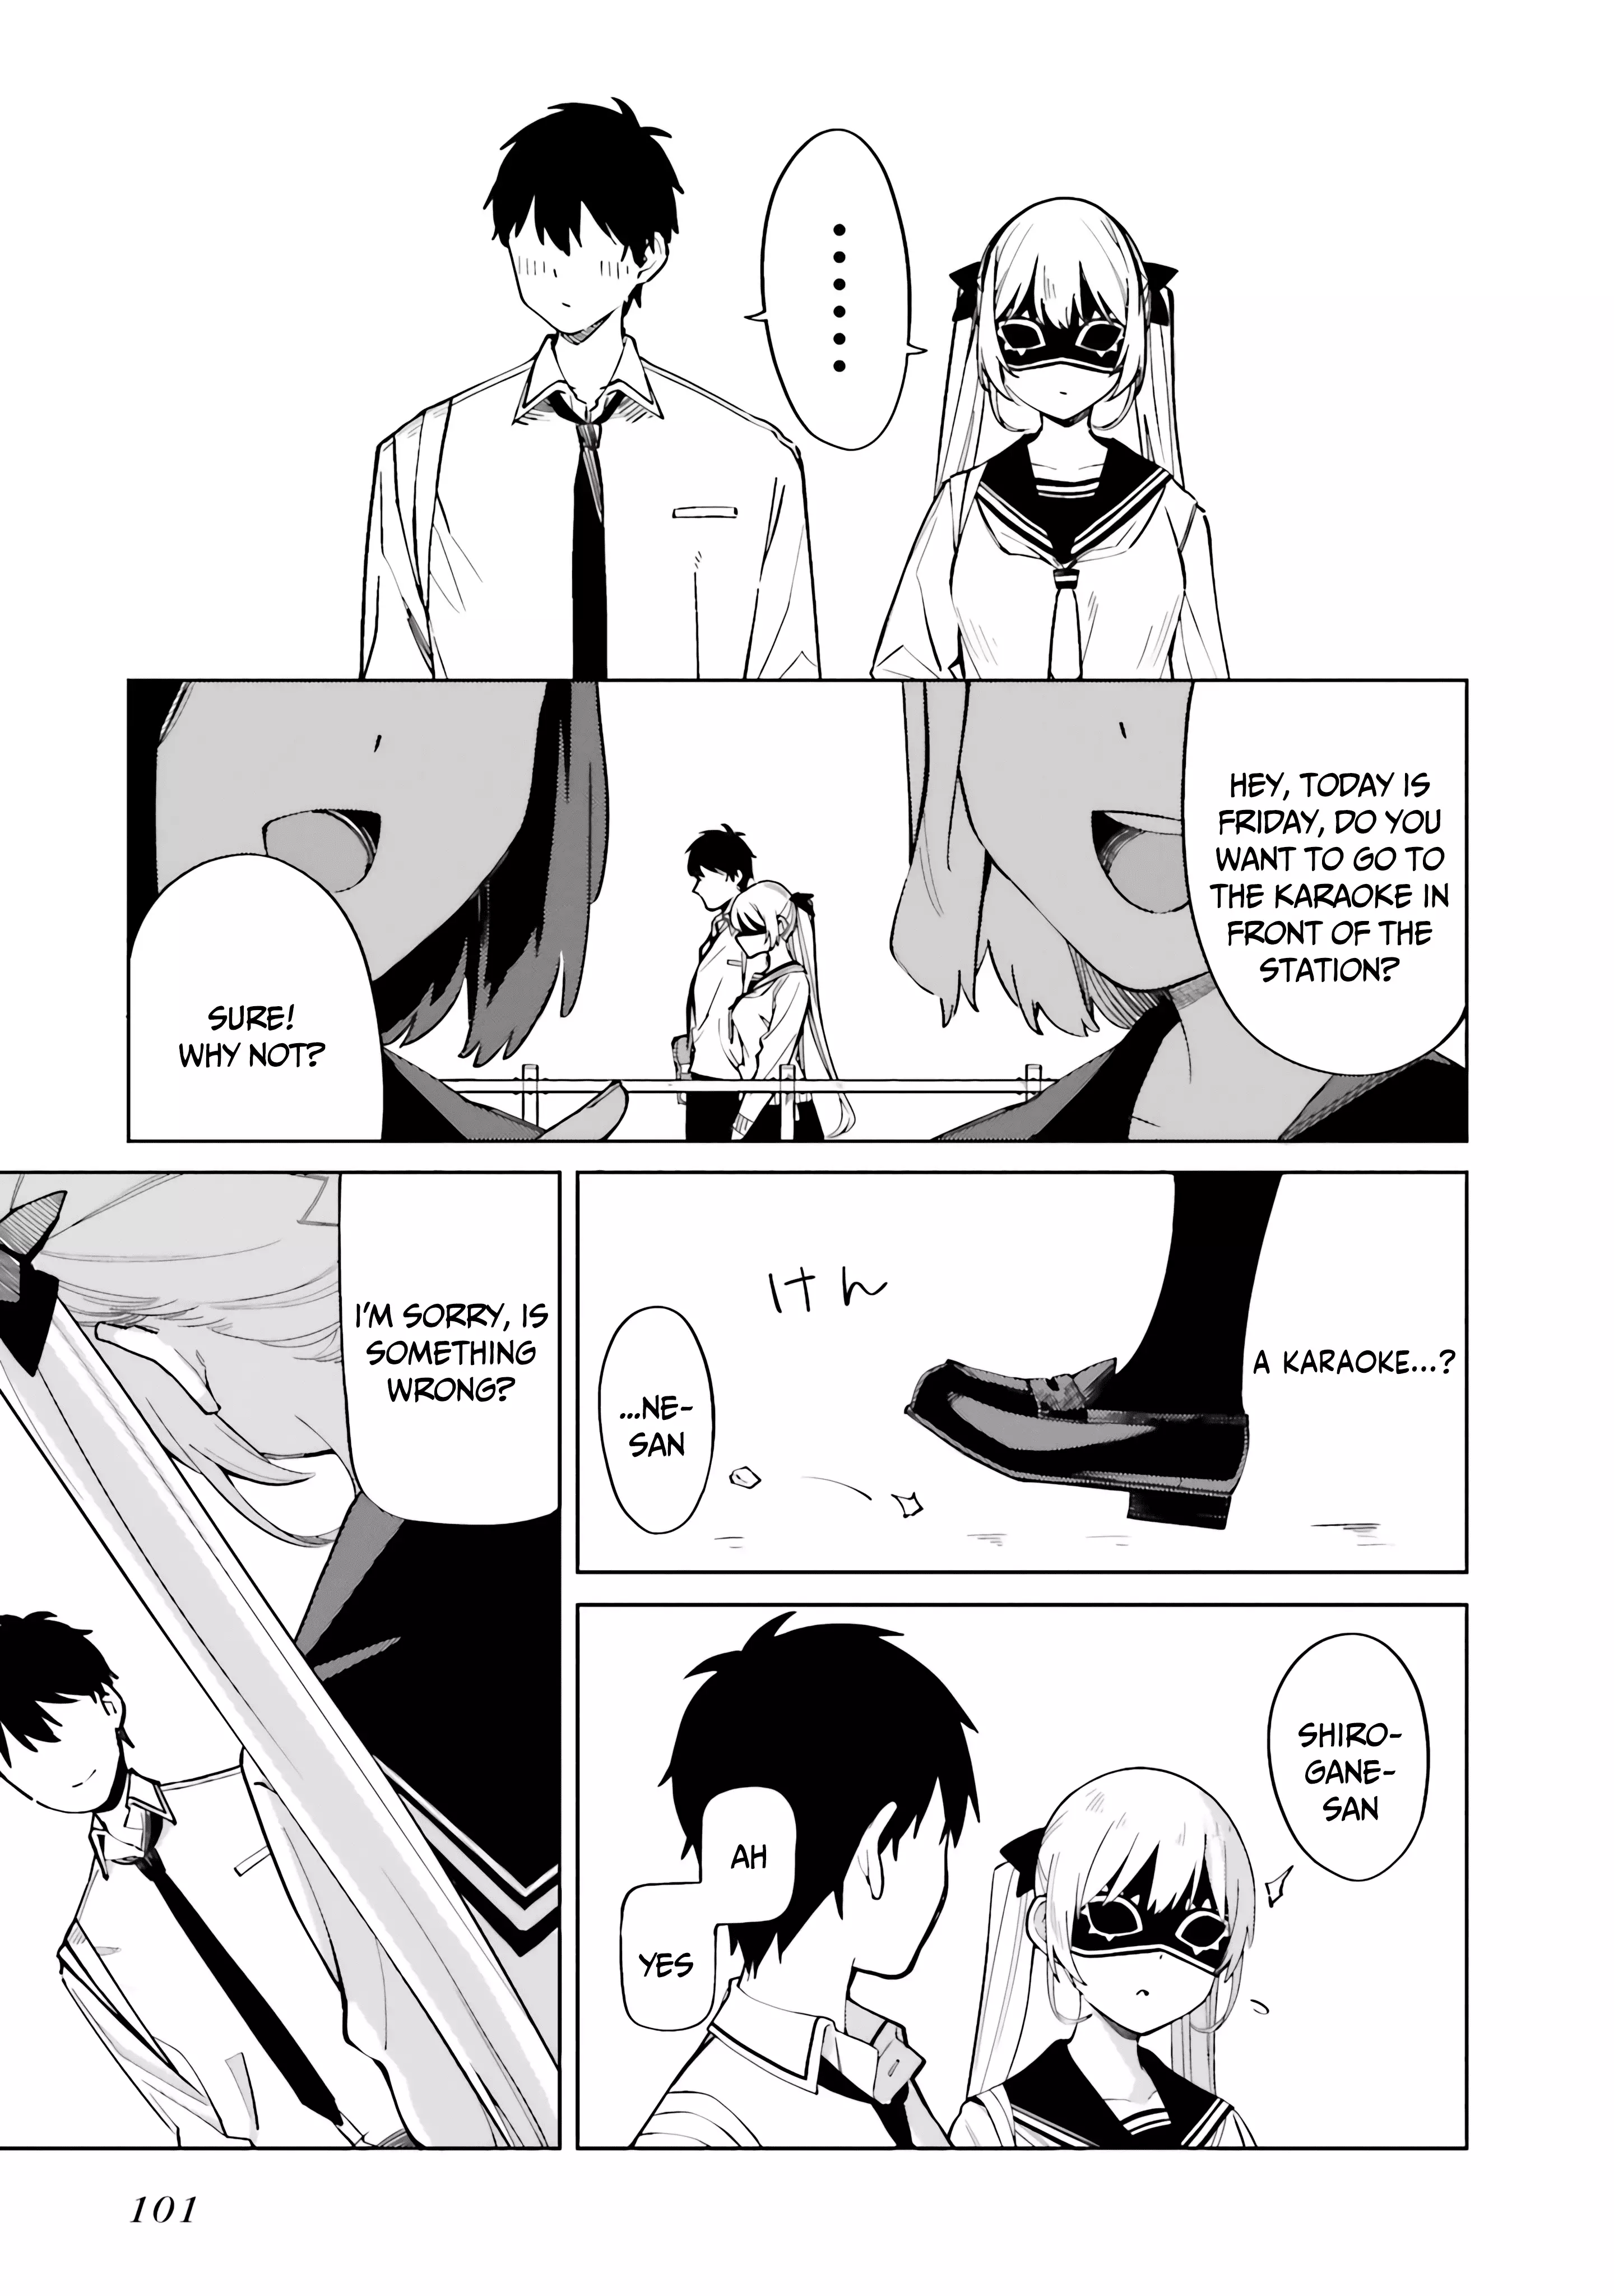 I Don't Understand Shirogane-San's Facial Expression At All - 16 page 10-80b58ca6